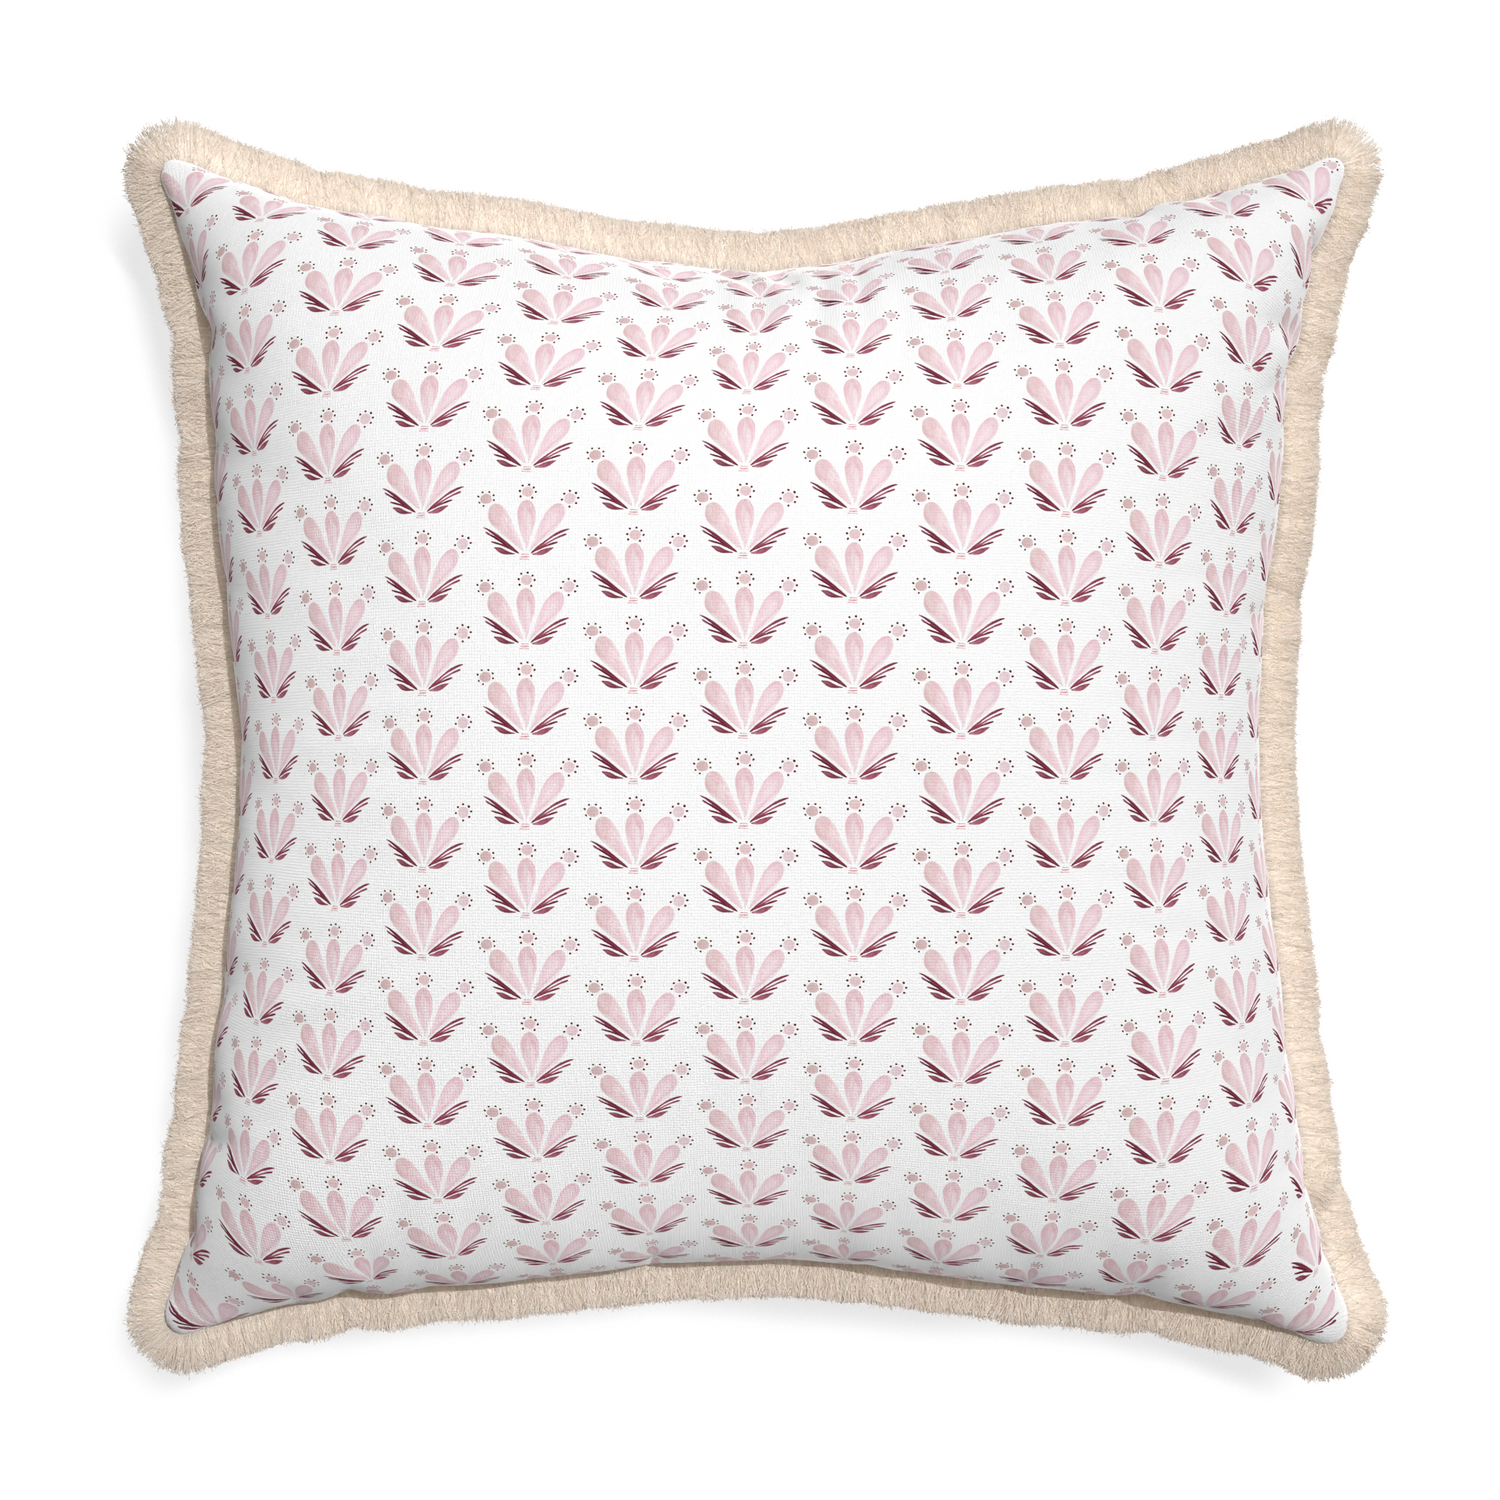 Euro-sham serena pink custom pink & burgundy drop repeat floralpillow with cream fringe on white background